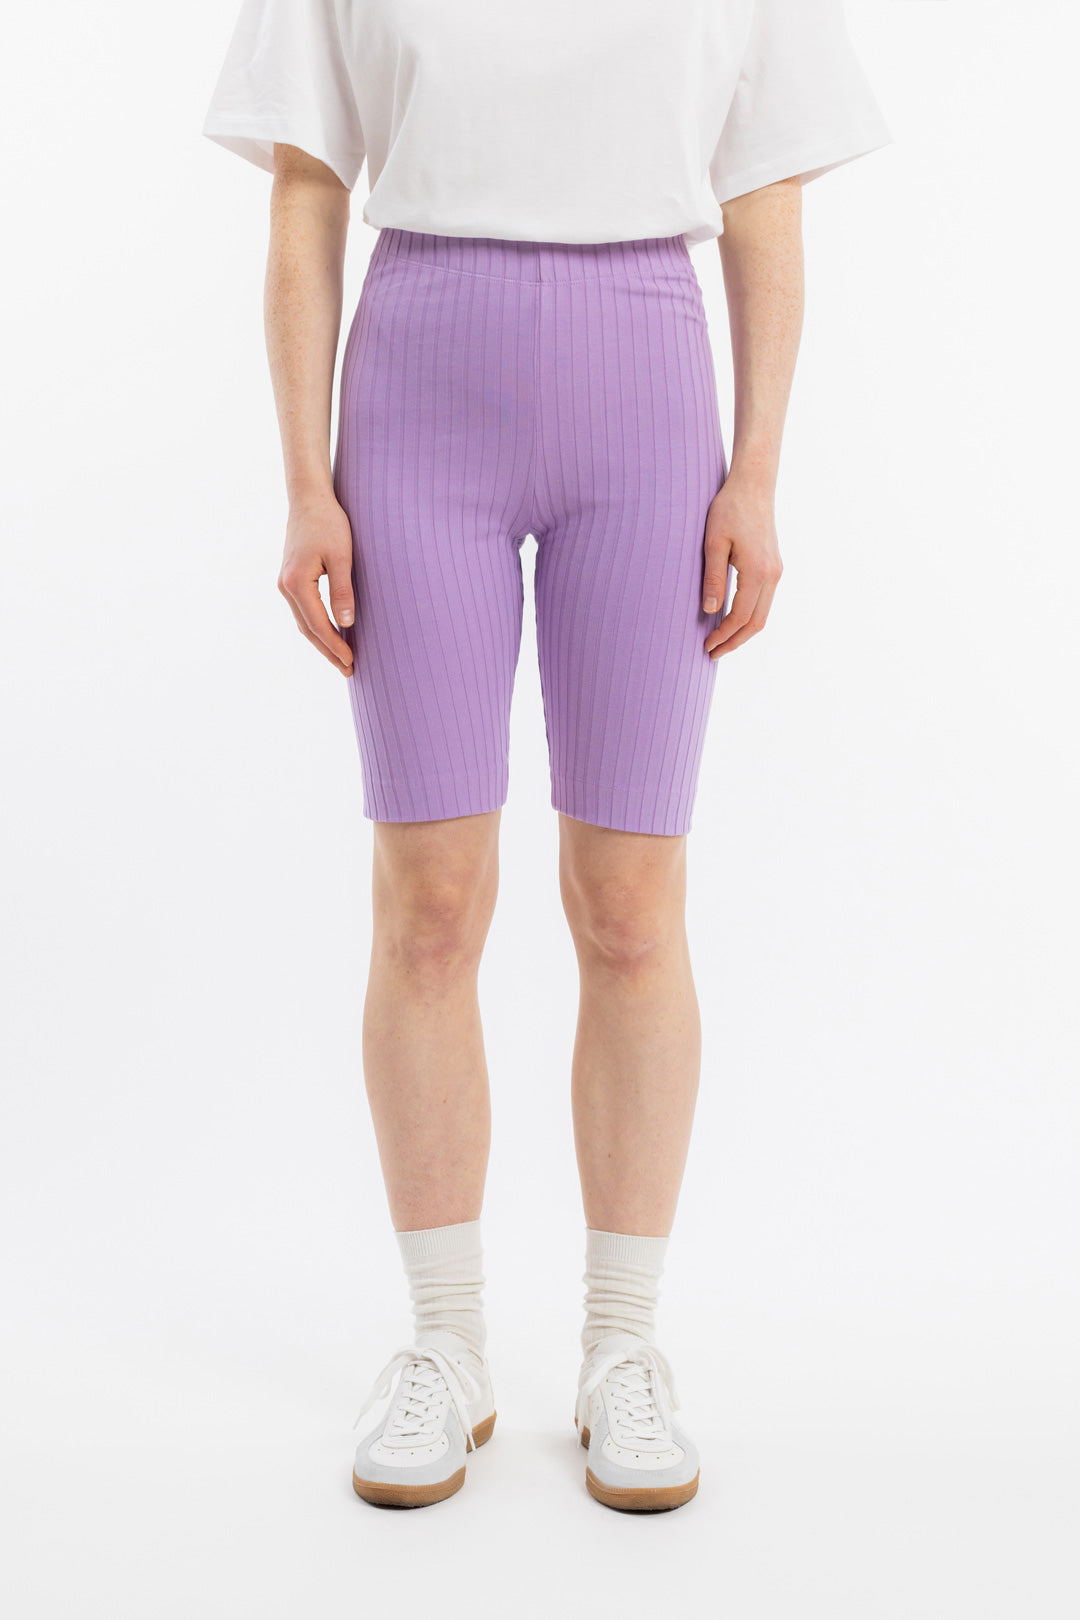 Purple biker shorts made from organic cotton by Rotholz